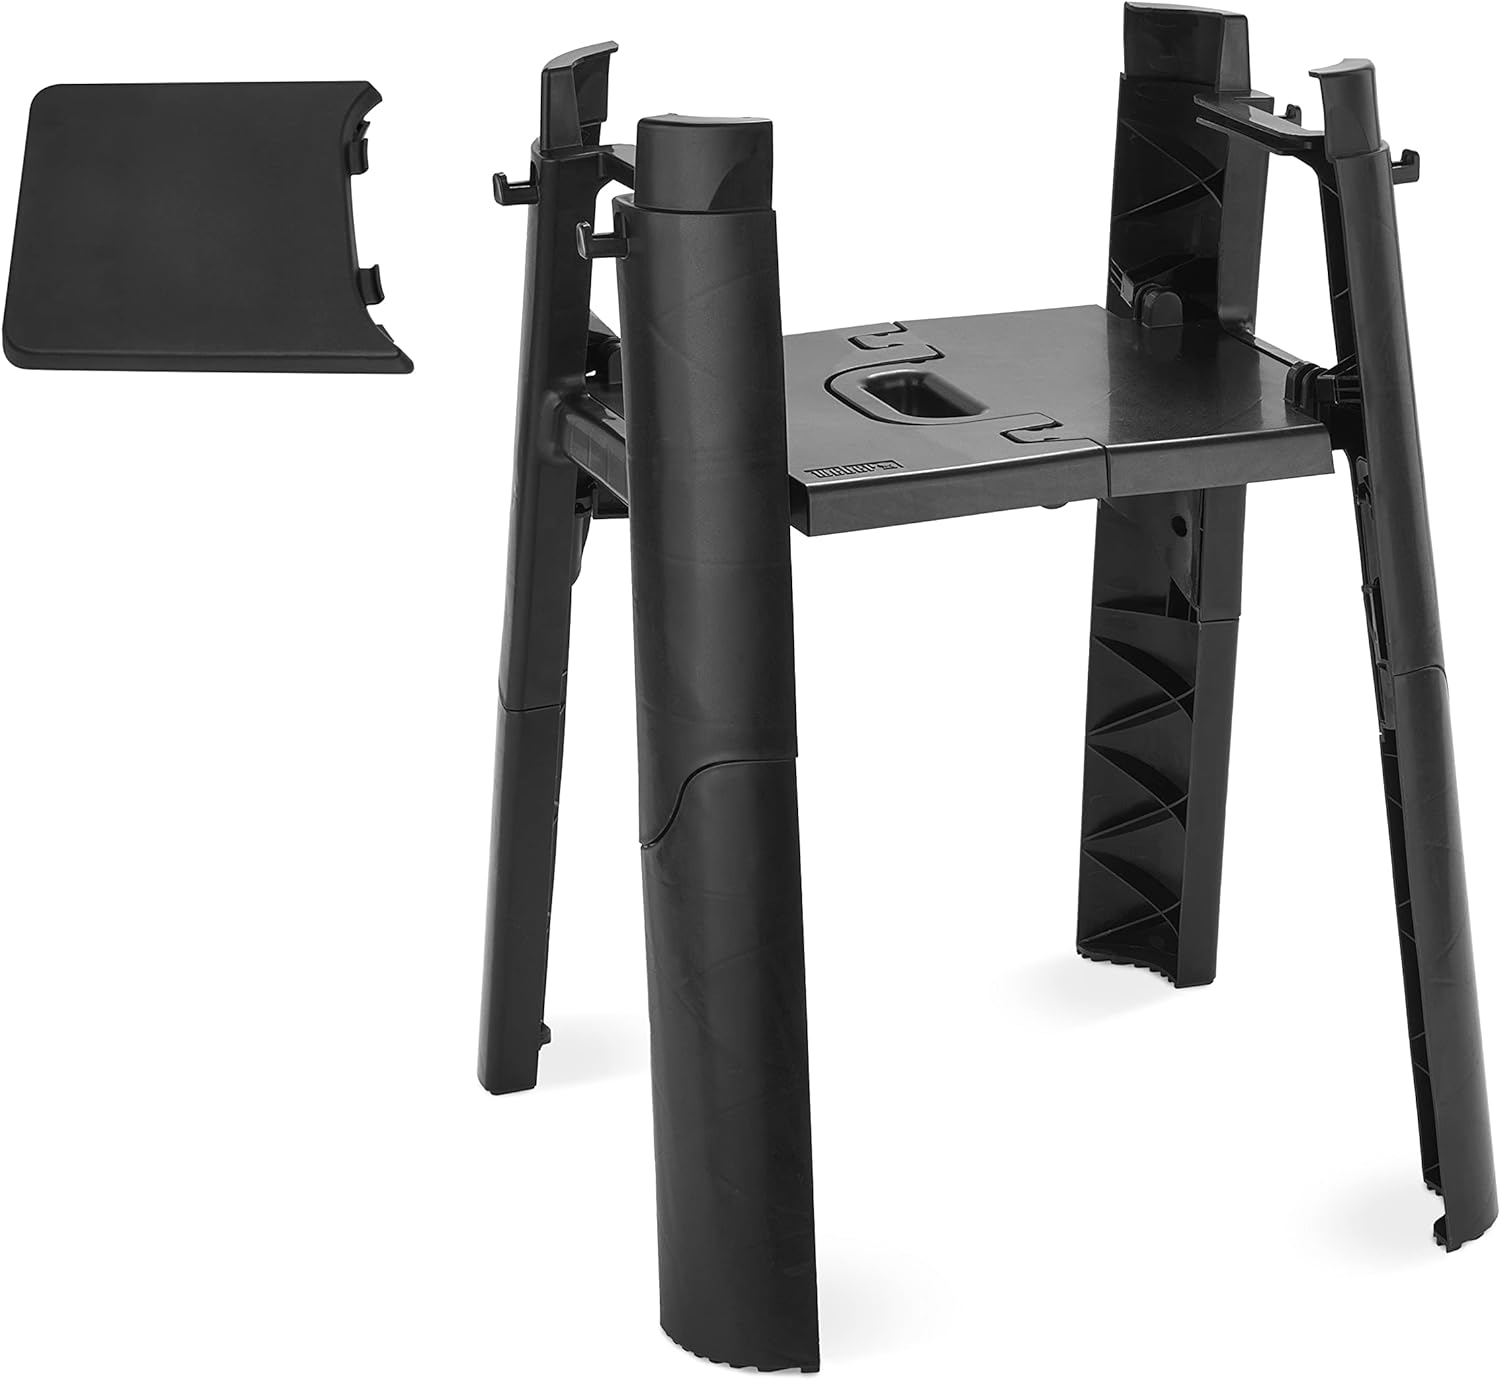 Weber Lumin Compact Electric Grill Stand, Black - Weber Lumin Compact Electric Grill Stand Review